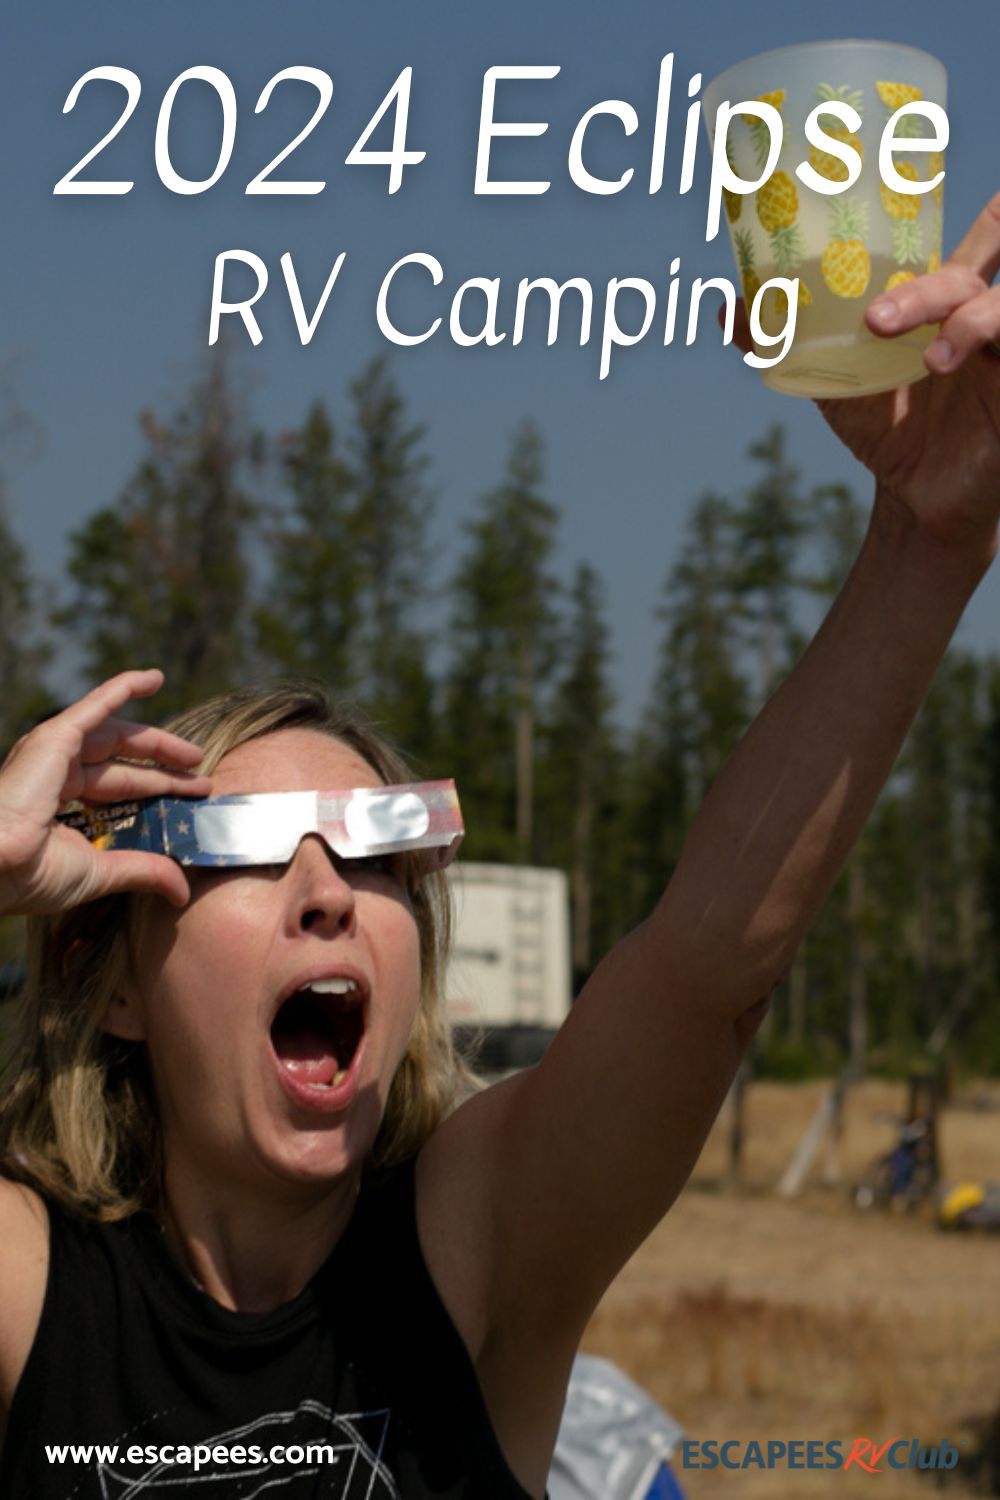 2024 Eclipse RV Camping Options 52